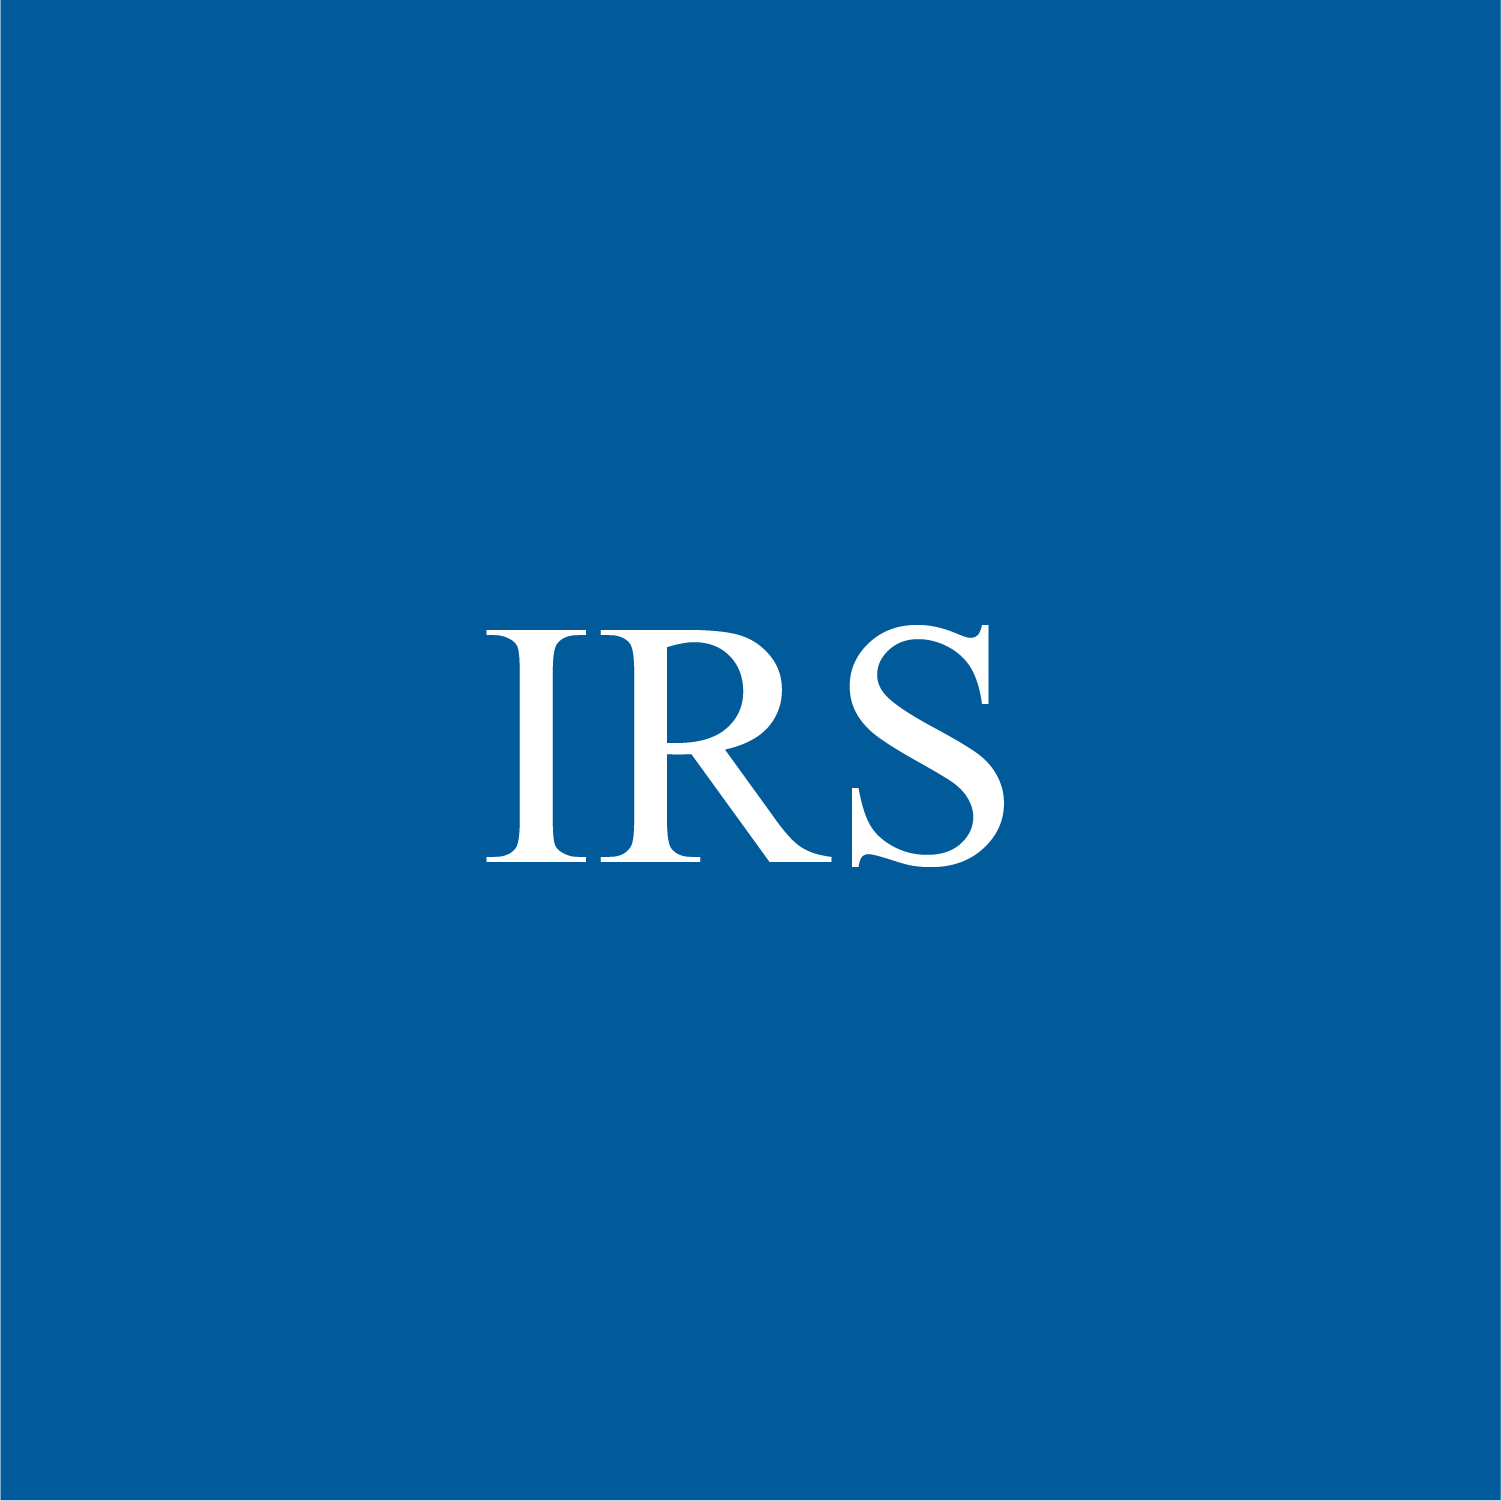 IRS announces more relief and details